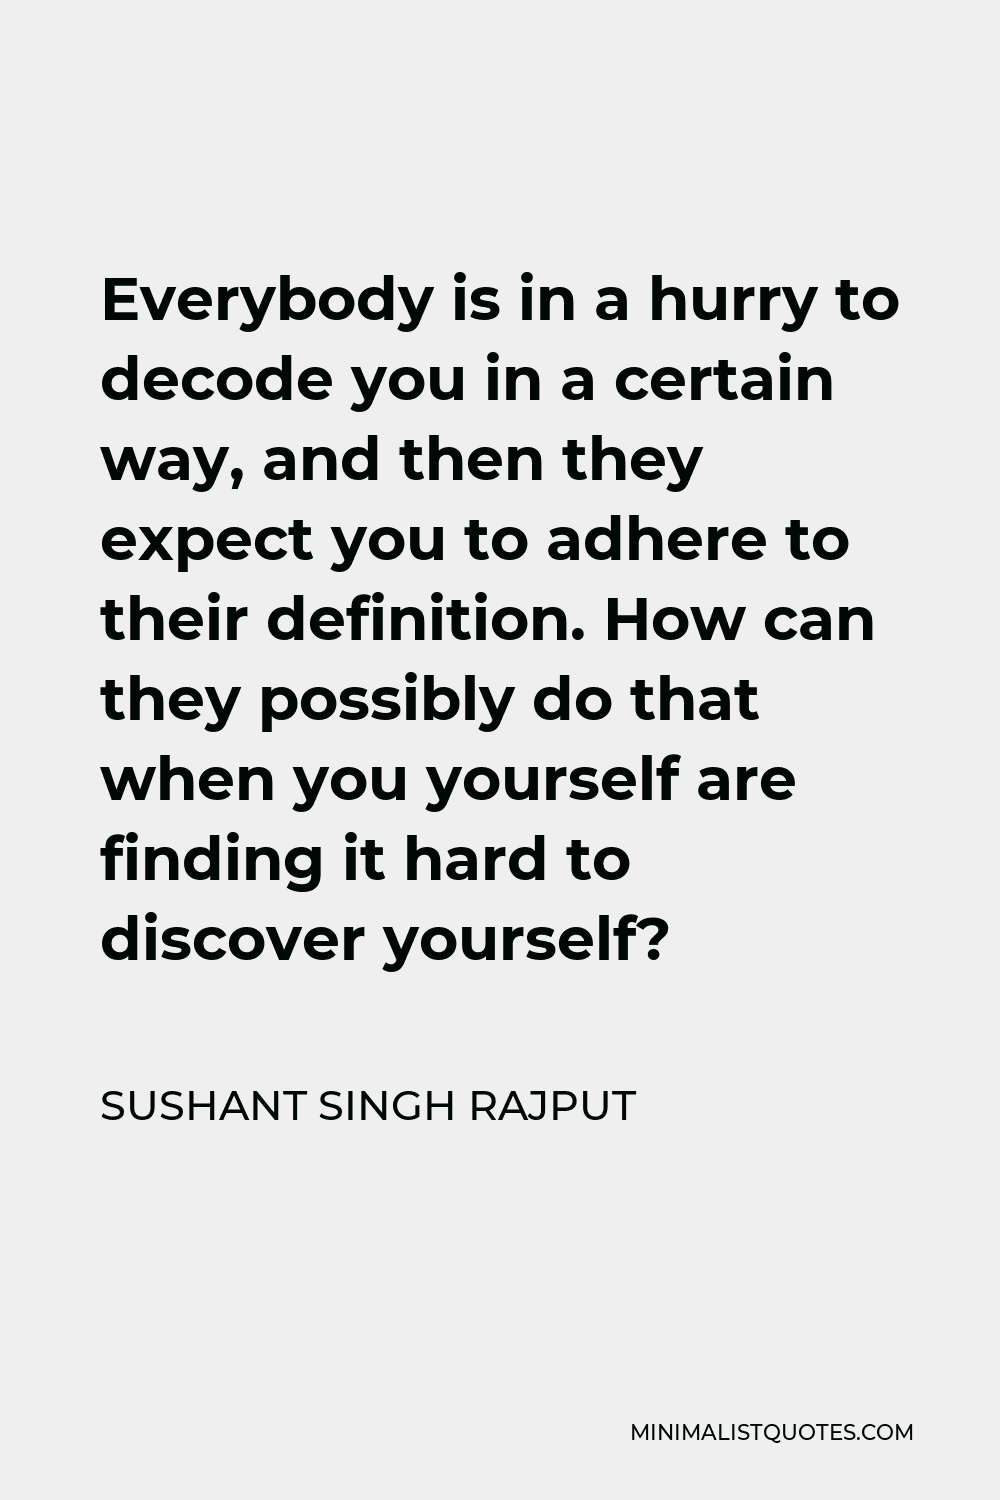 Sushant Singh Rajput Quote - Everybody is in a hurry to decode you in a certain way, and then they expect you to adhere to their definition. How can they possibly do that when you yourself are finding it hard to discover yourself?